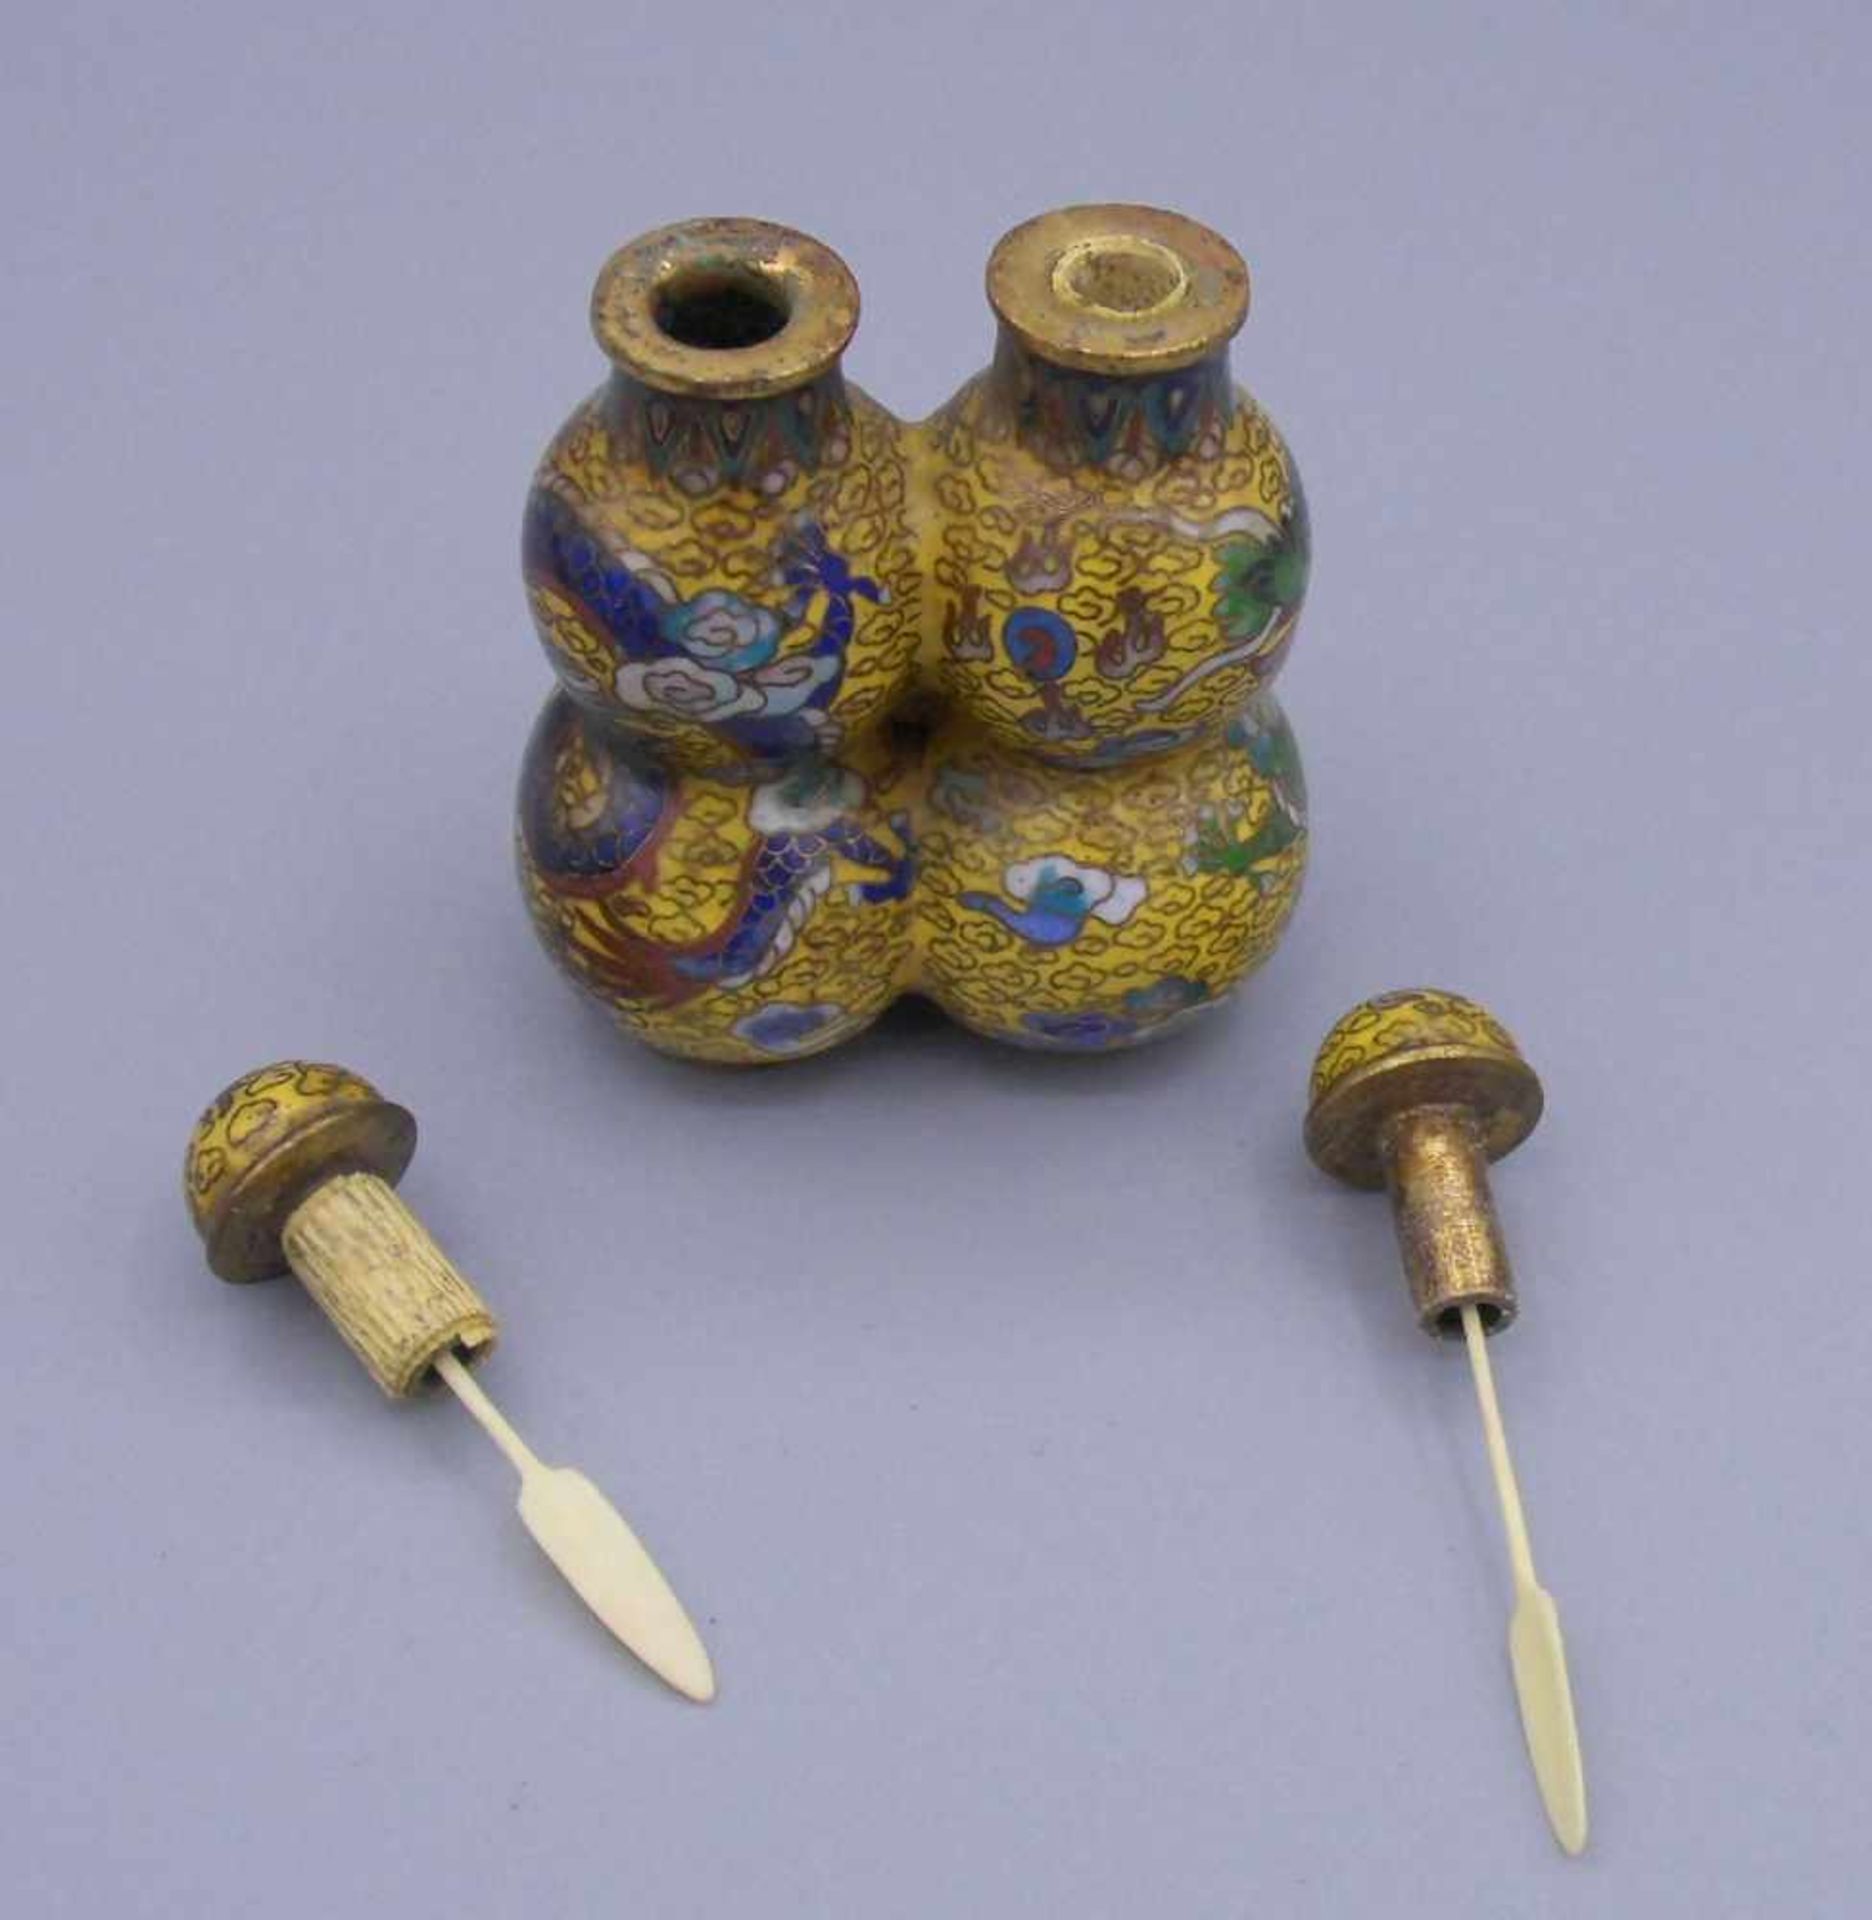 CLOISONNÉ - SNUFFBOTTLE / DOPPEL-SCHNUPFTABAKBEHÄLTER, China, Emaille über Messing. Doppel- - Image 6 of 7